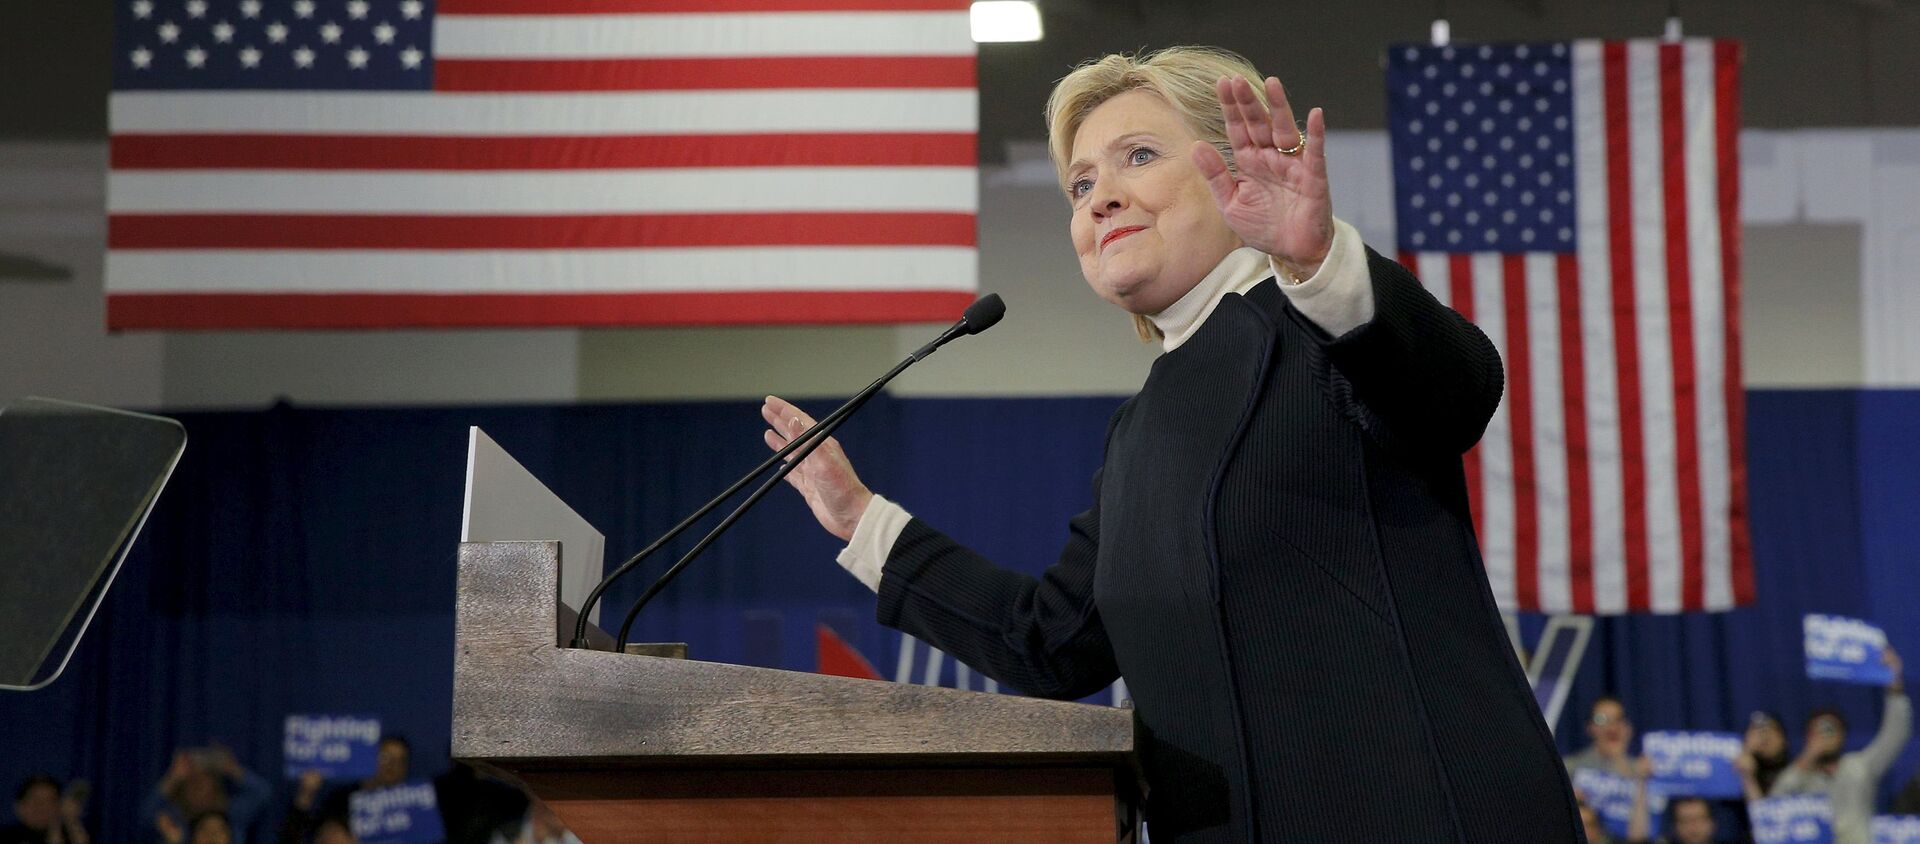 Democratic US presidential candidate Hillary Clinton speaks to supporters at her 2016 New Hampshire presidential primary night rally in Hooksett, New Hampshire, 9 February 2016 - Sputnik International, 1920, 06.11.2020